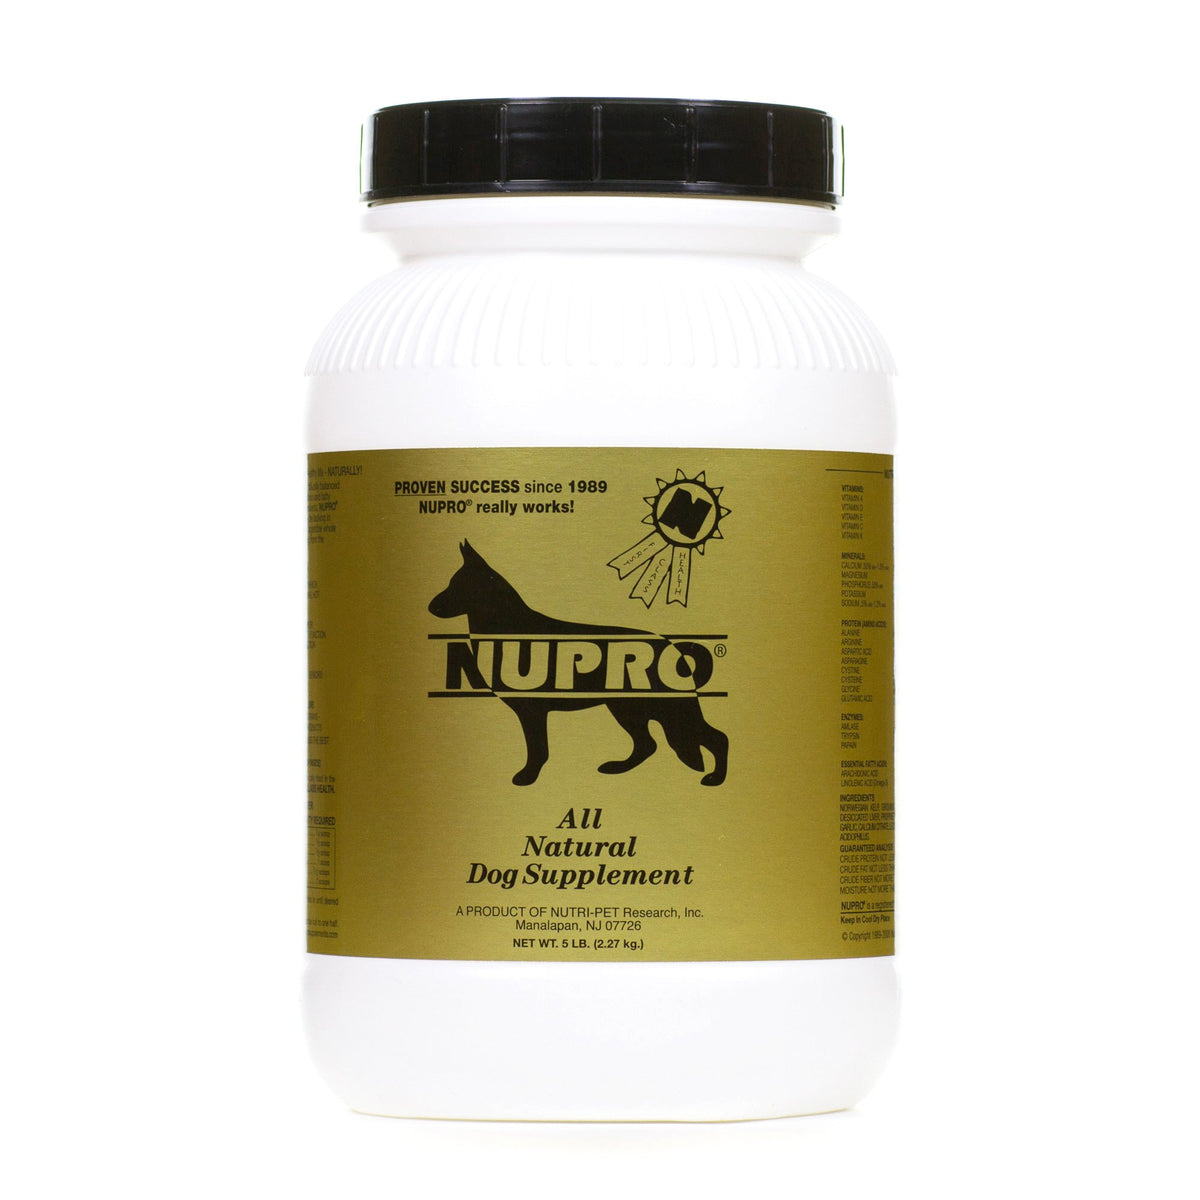 Nupro Dog Supplement 5lb-Four Muddy Paws